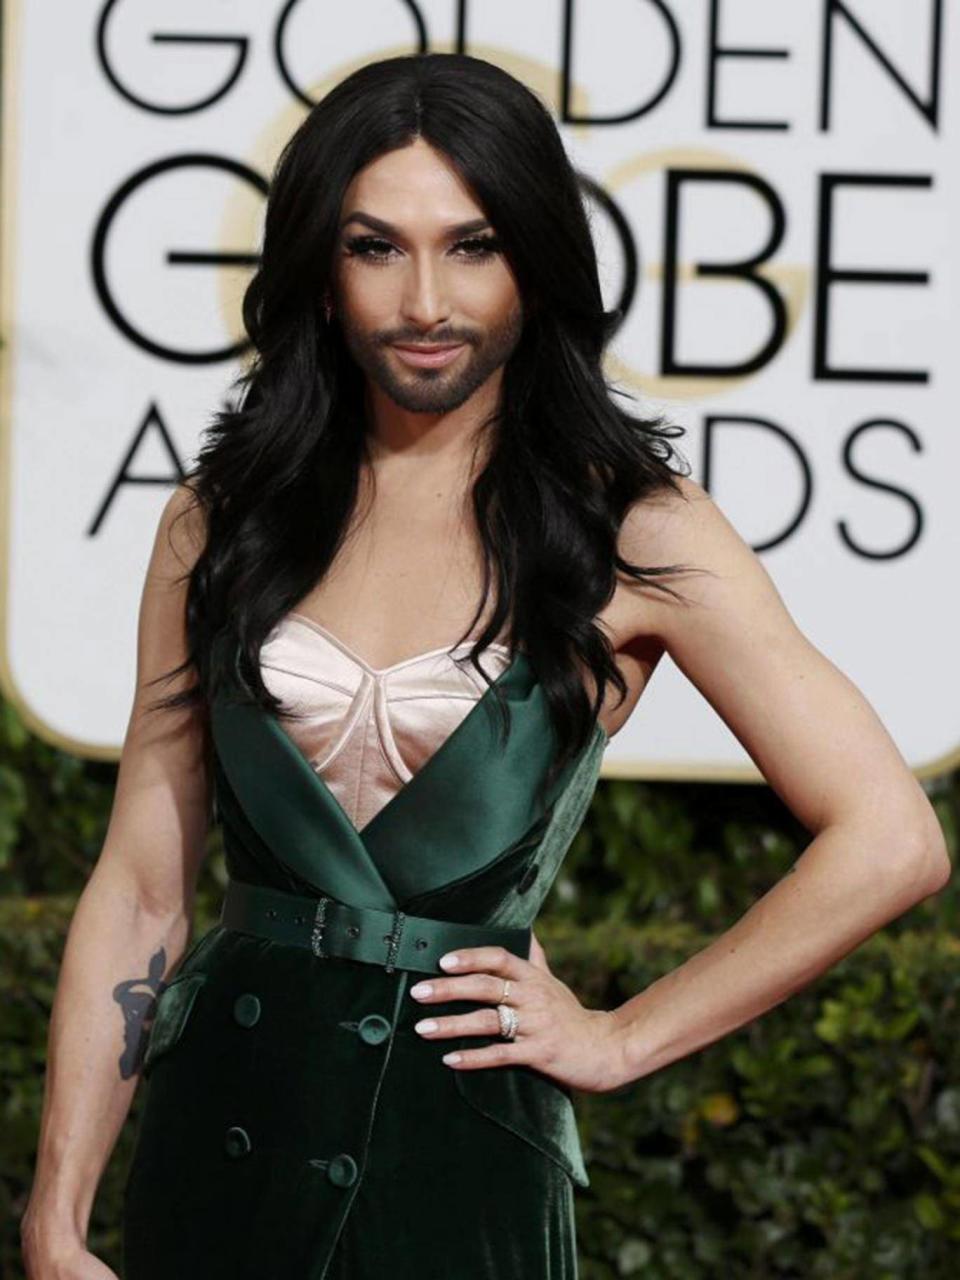 Conchita Wurst arrives at the 72nd Annual Golden Globe Awards (Reuters)